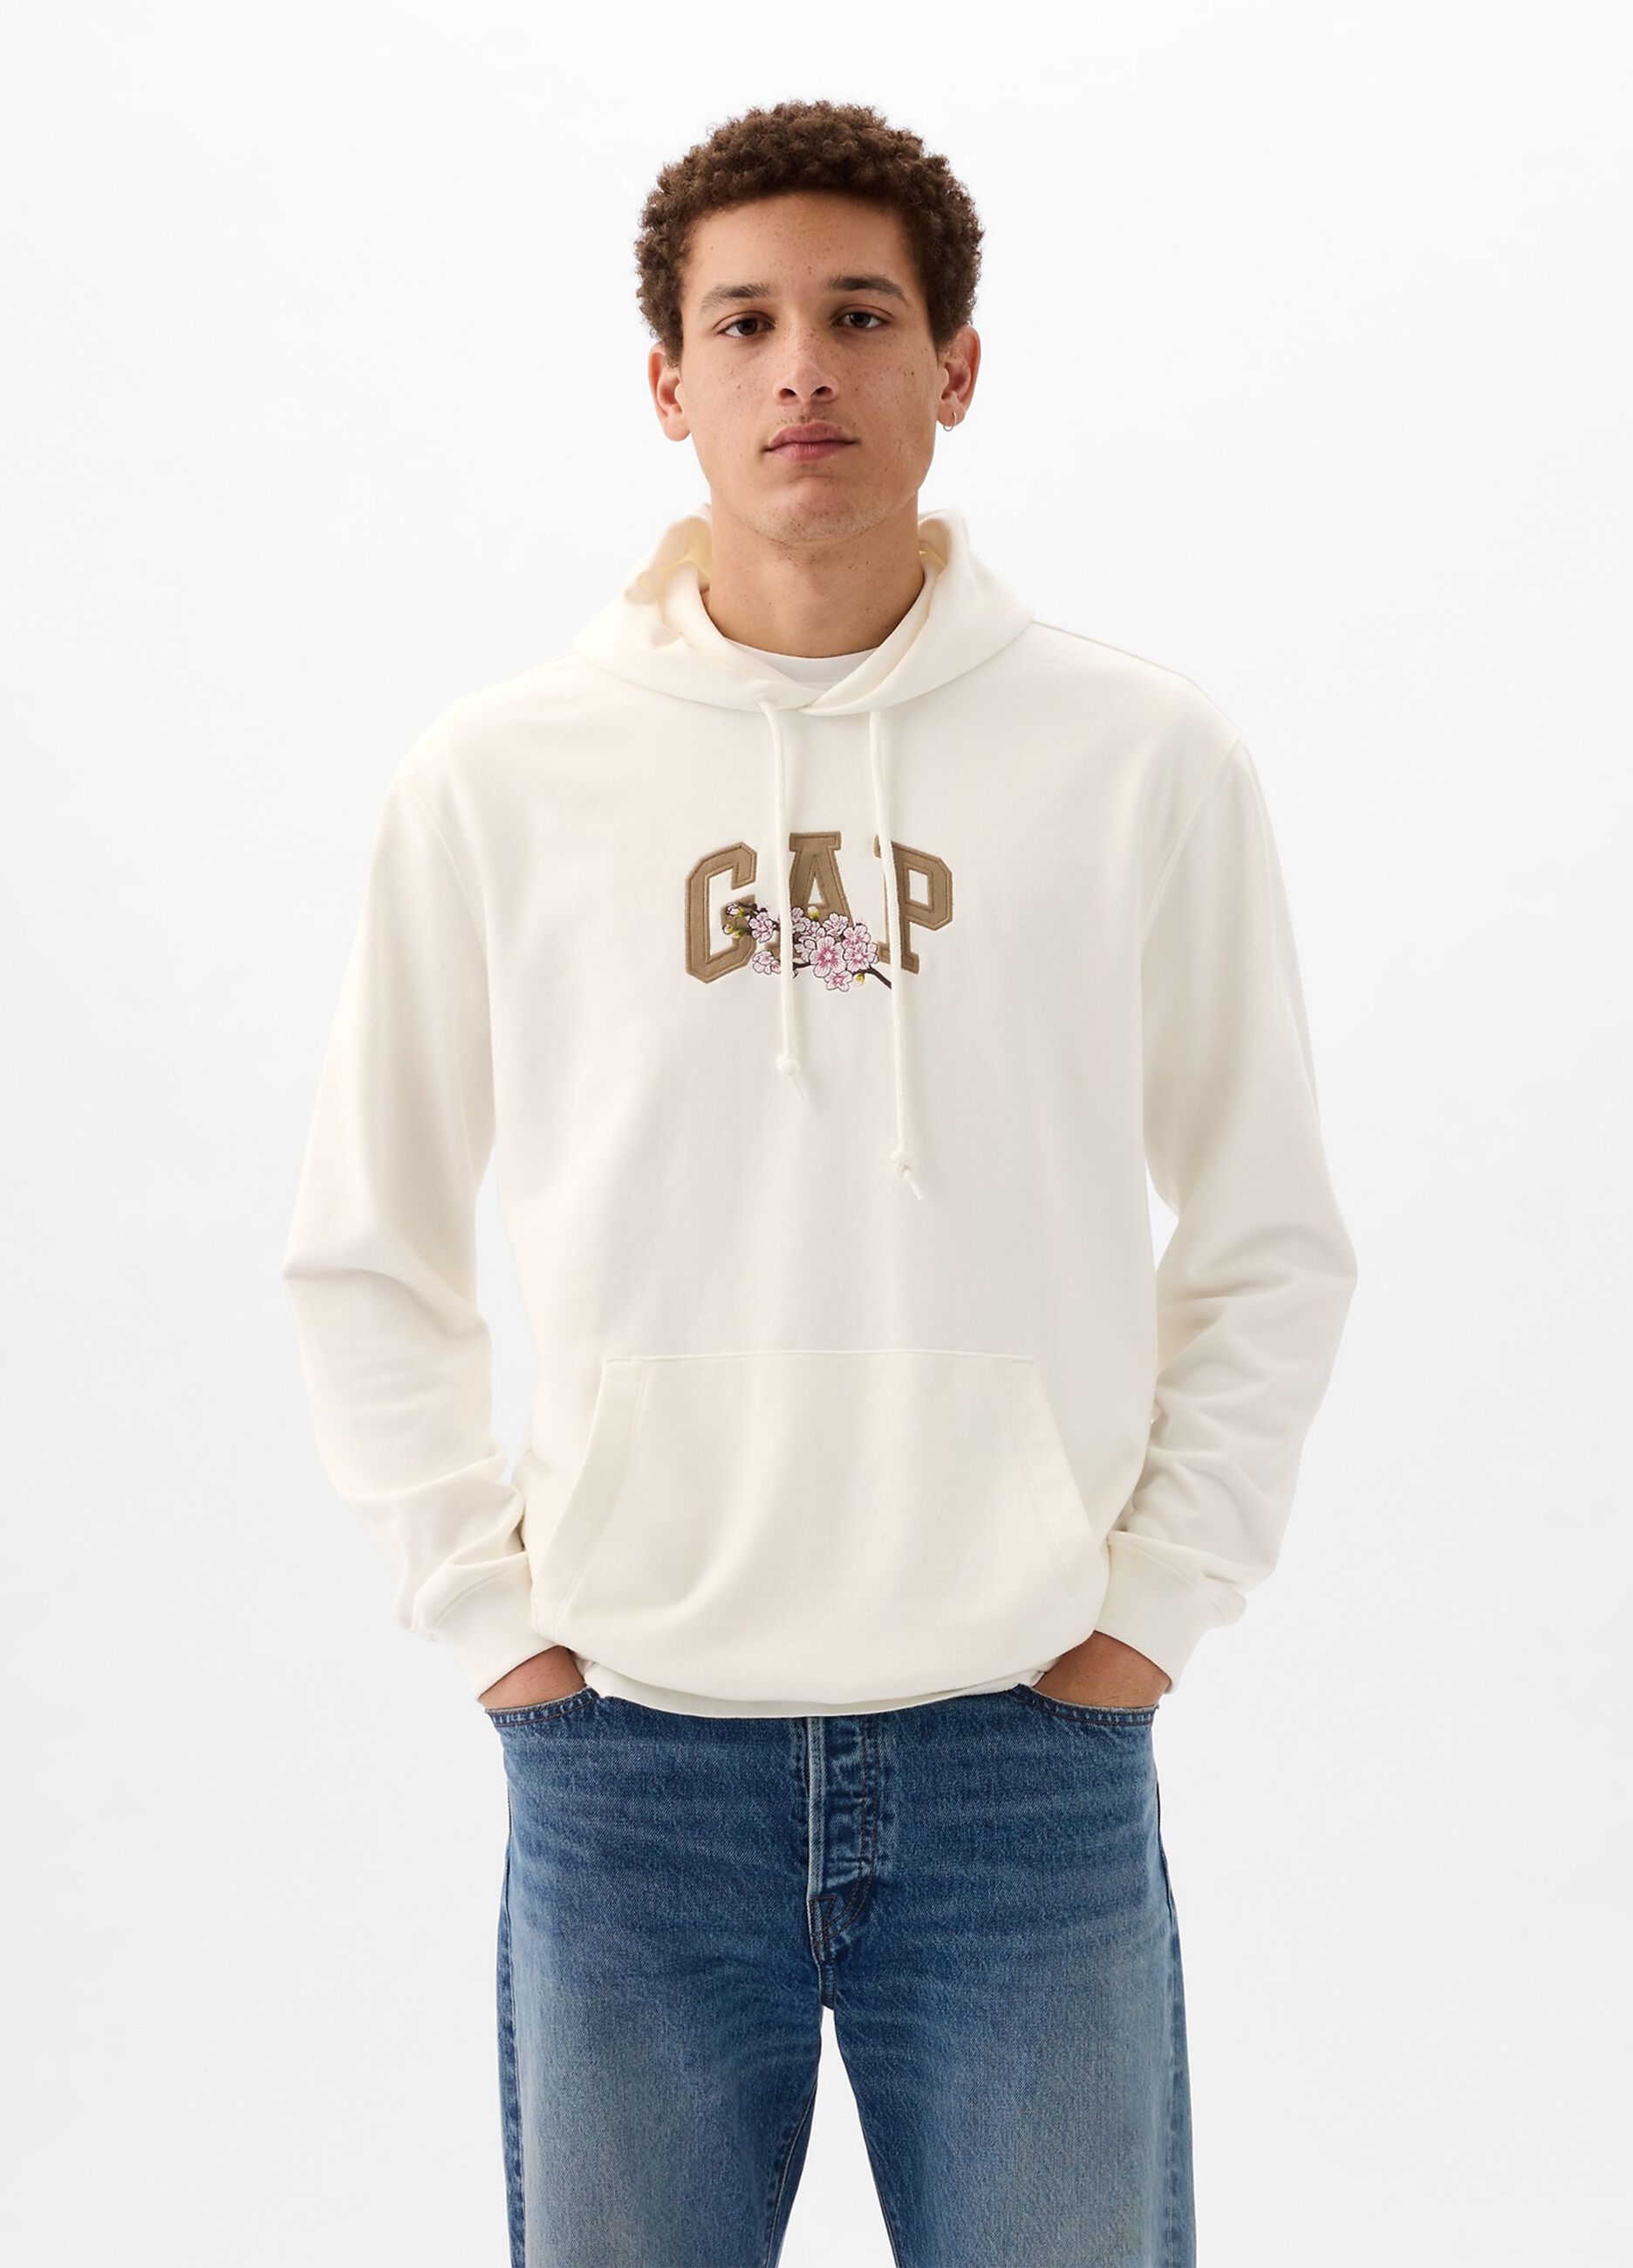 Sweatshirt with logo embroidery and cherry blossom